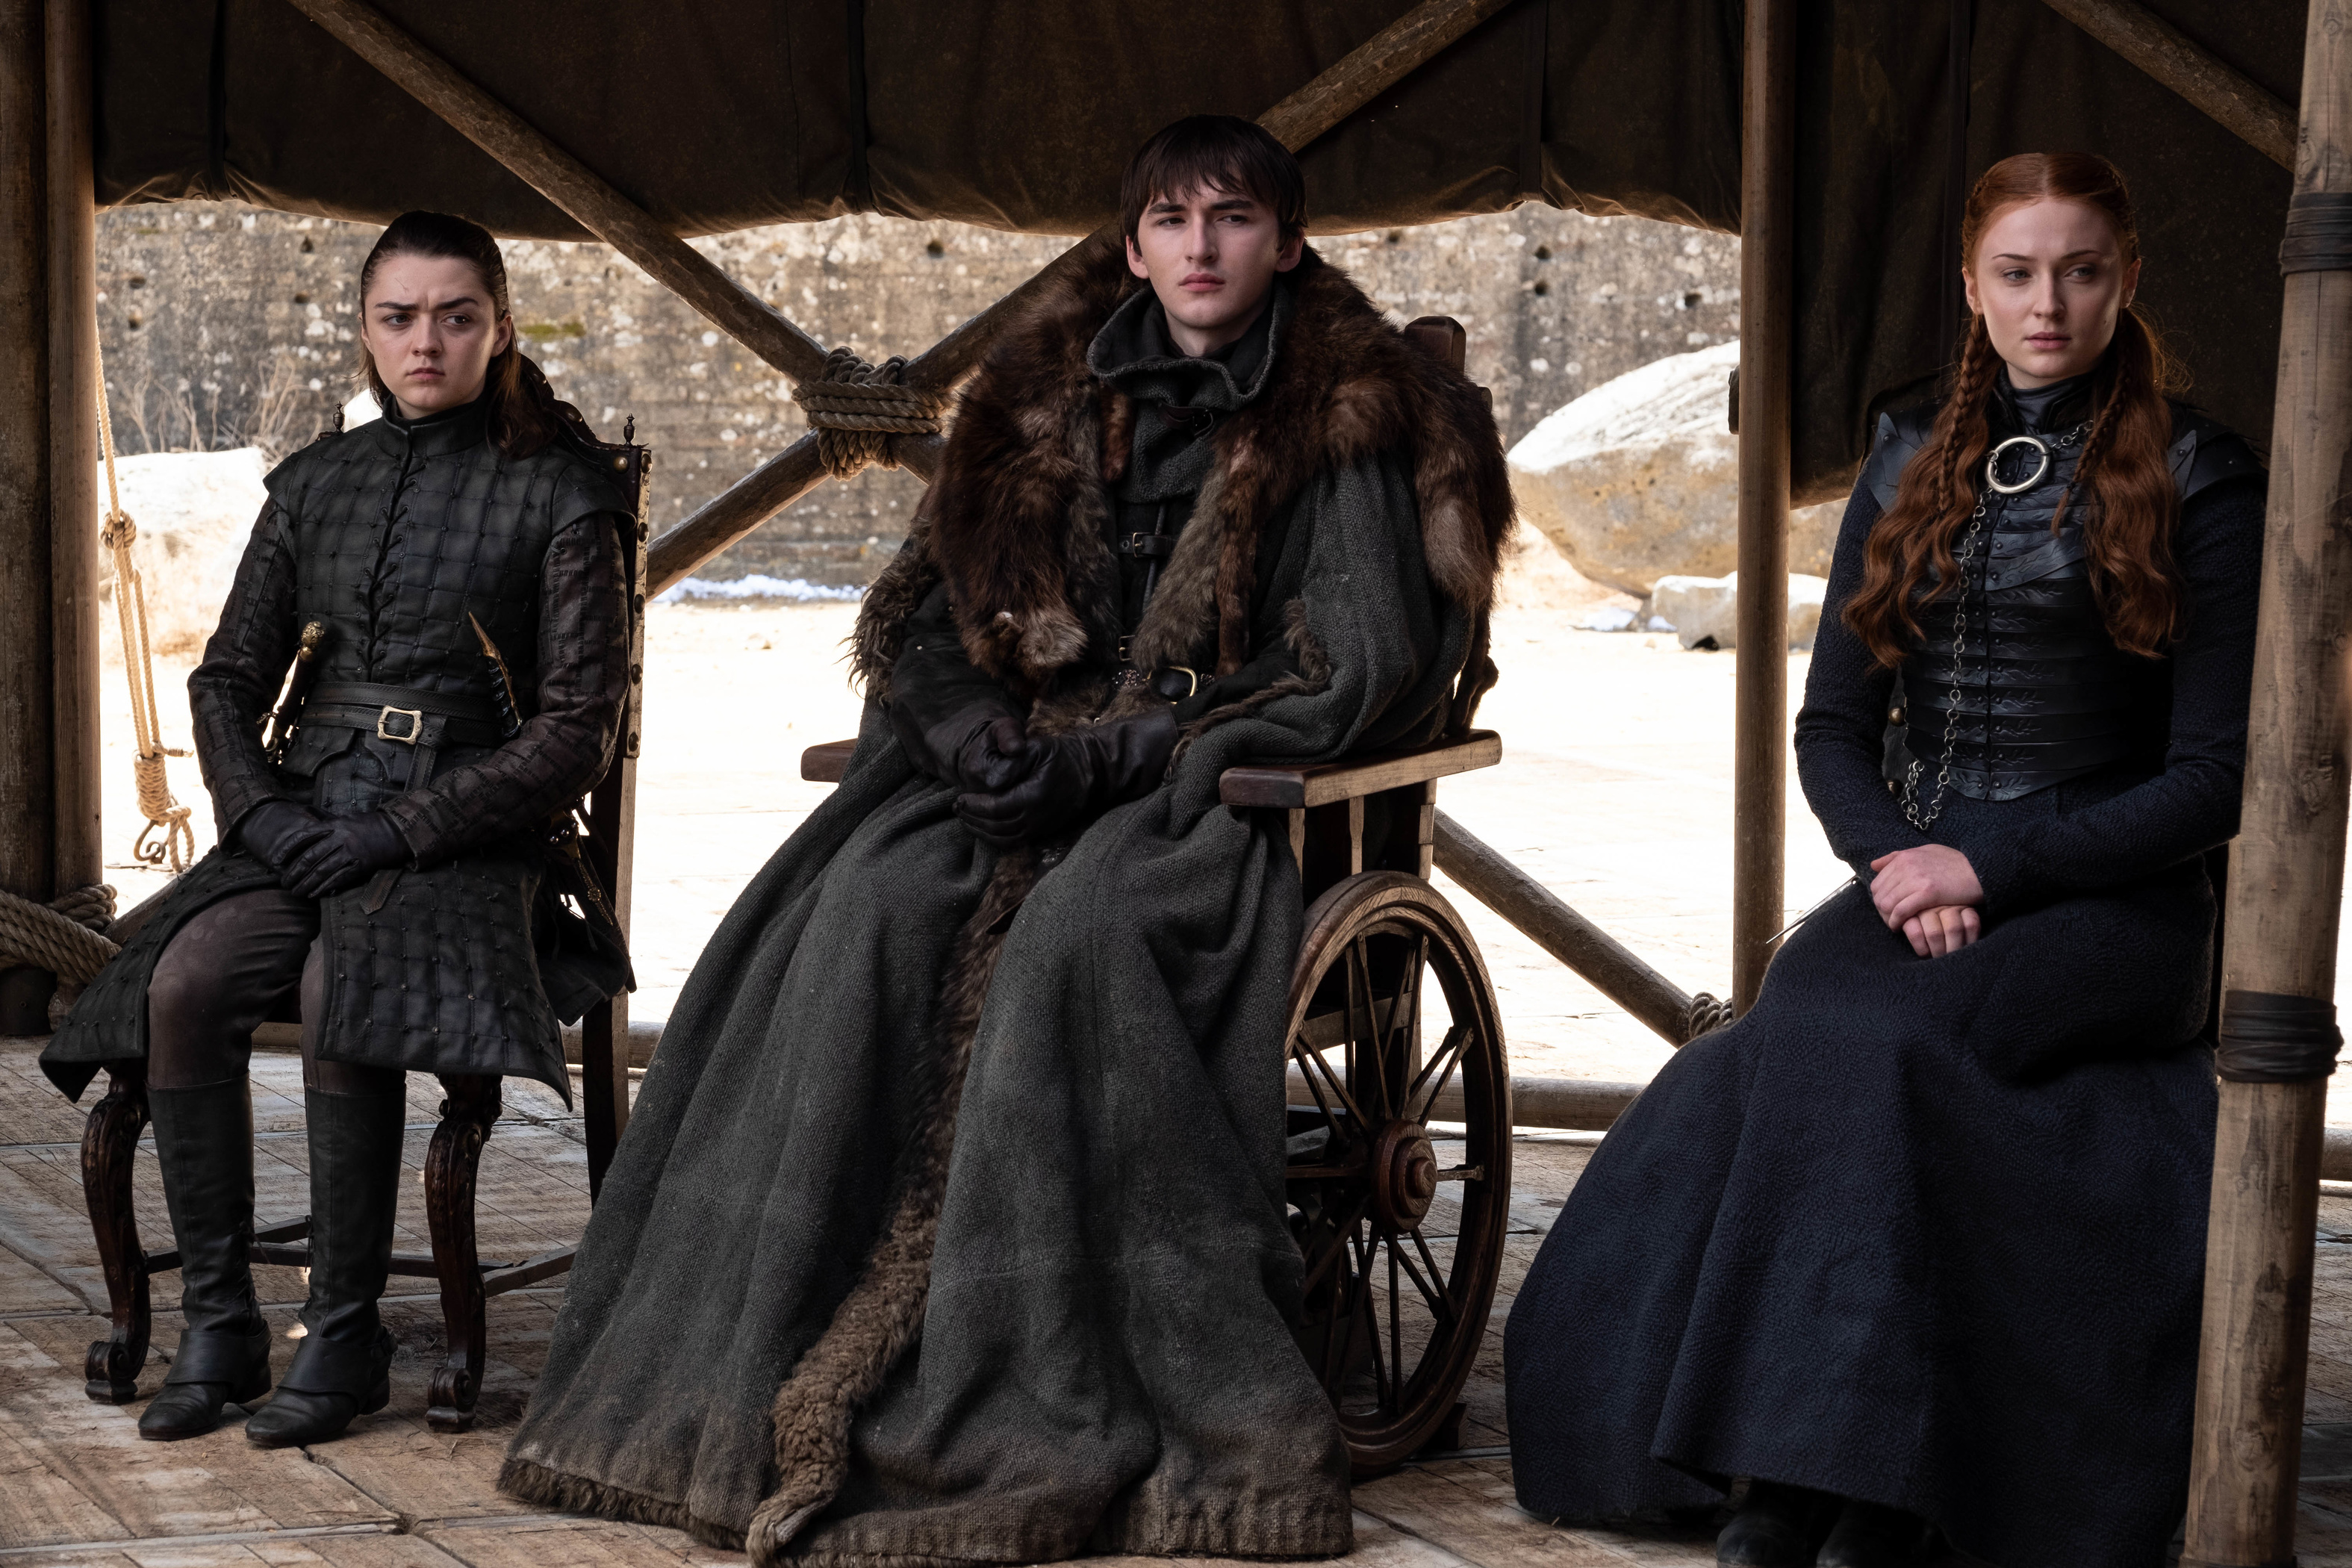 Maisie Williams as Arya Stark, Isaac Hempstead Wright as Bran Stark and Sophie Turner as Sansa Stark in the series finale of <i>Game of Thrones</i>. (Isaac Hempstead Wright as Bran Stark in the series finale of <i>Game of Thrones</i>.)